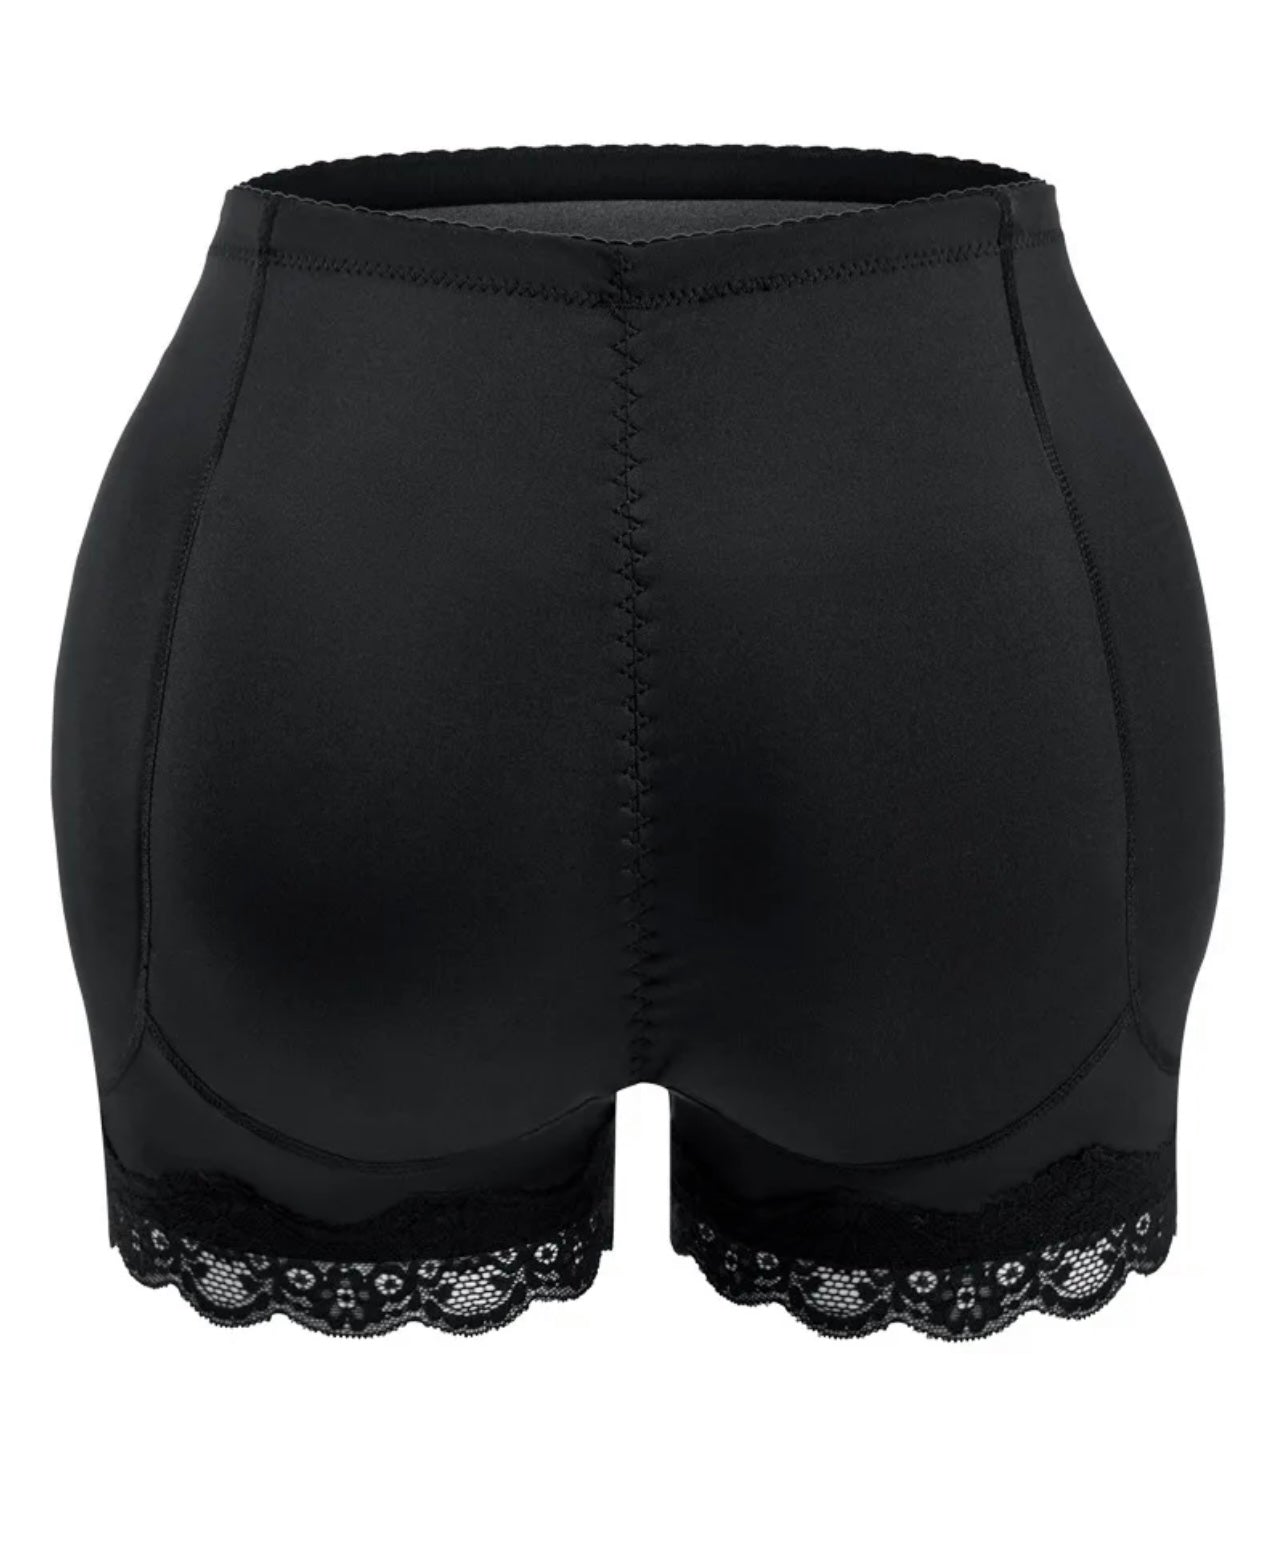 BBL shorts ( hips & Butt Pad included) - WrapAndTuck